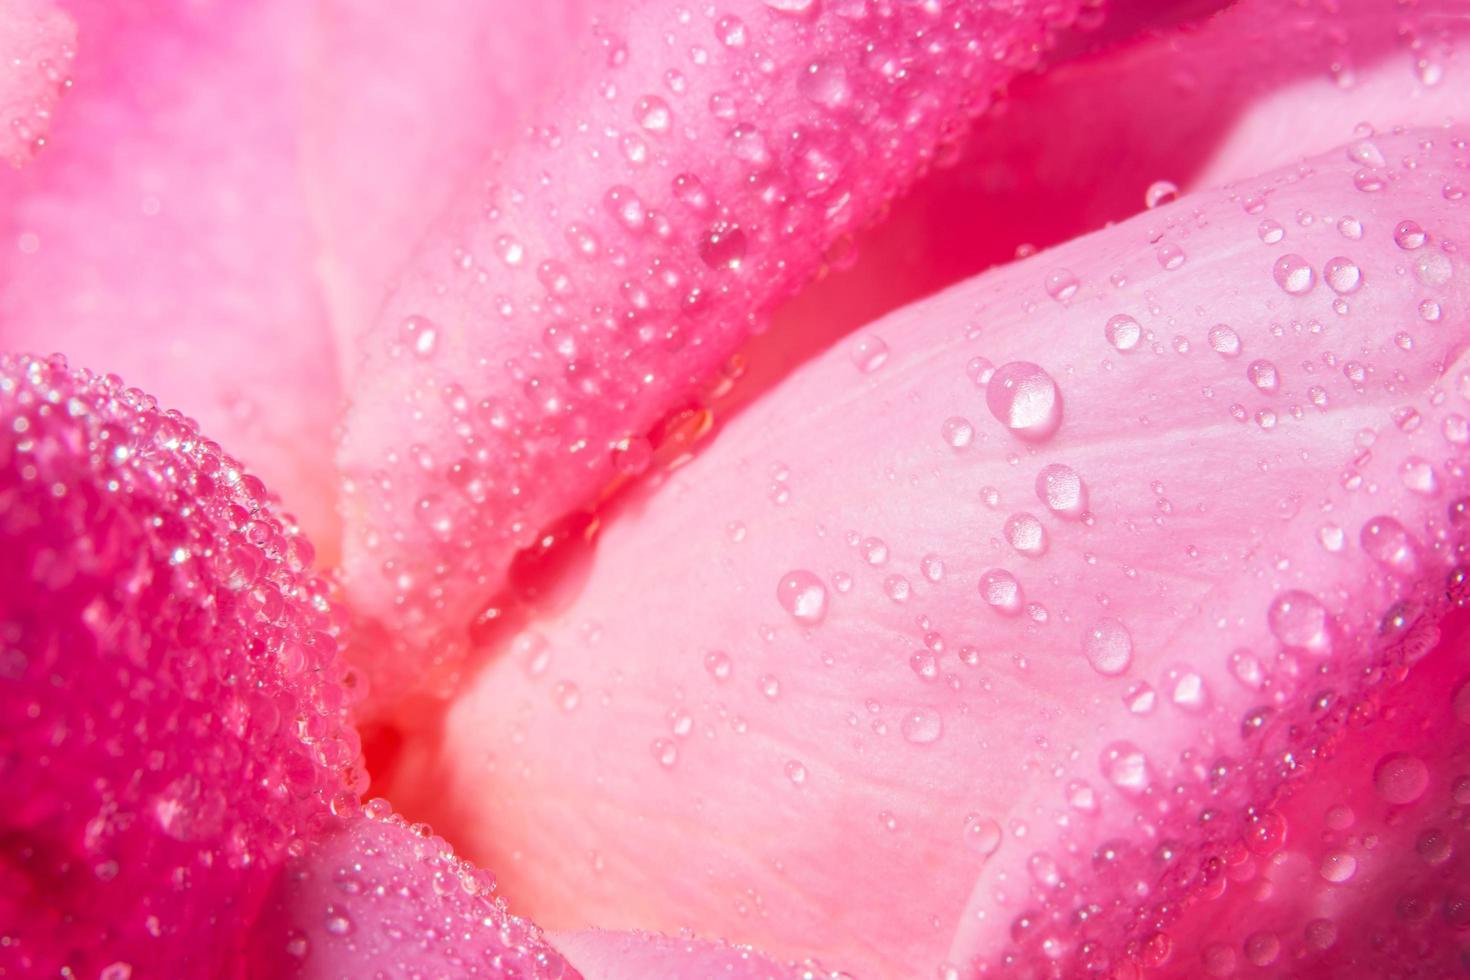 Water drops on rose petals photo